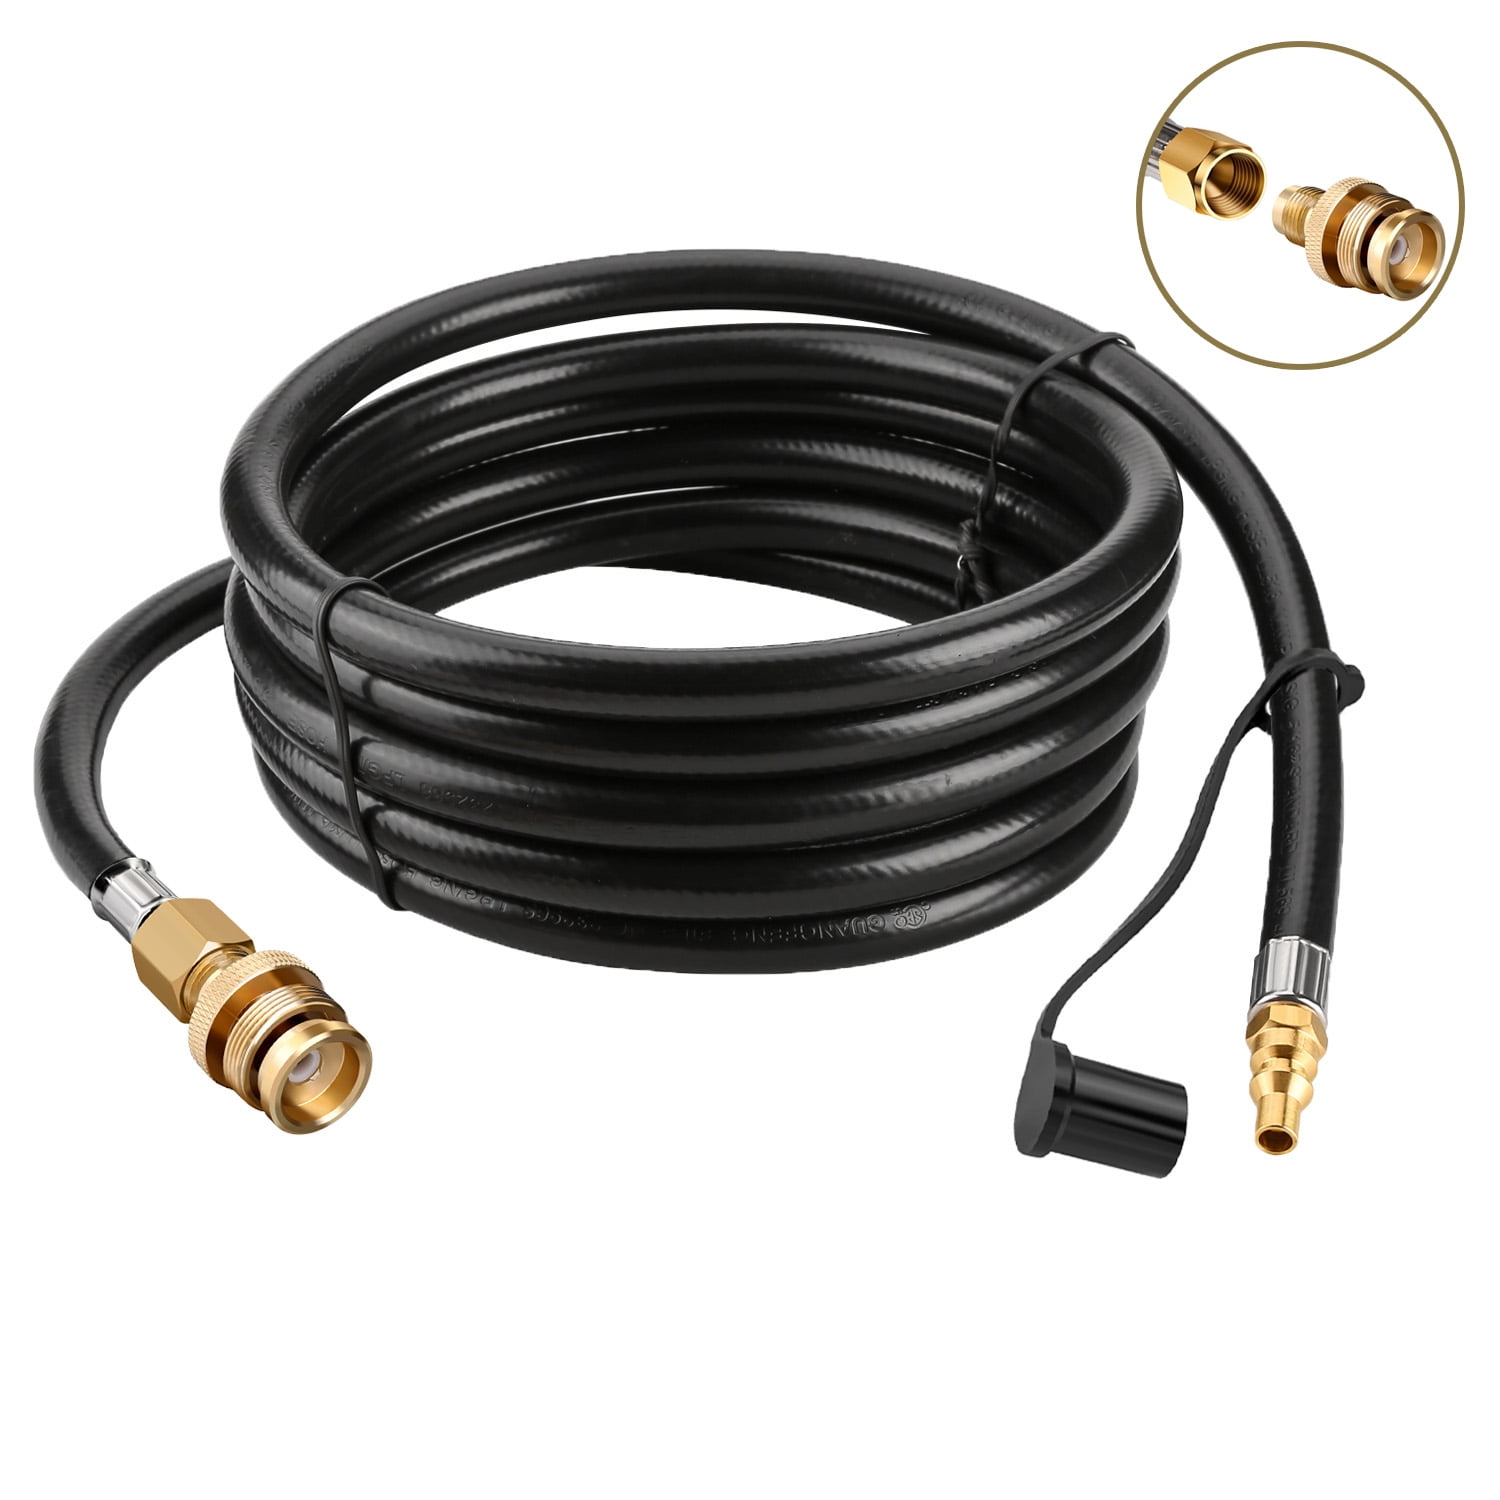 12FT 1/4" Quick Connect Propane Hose for RV to Hook Up Portable Camping BBQ 